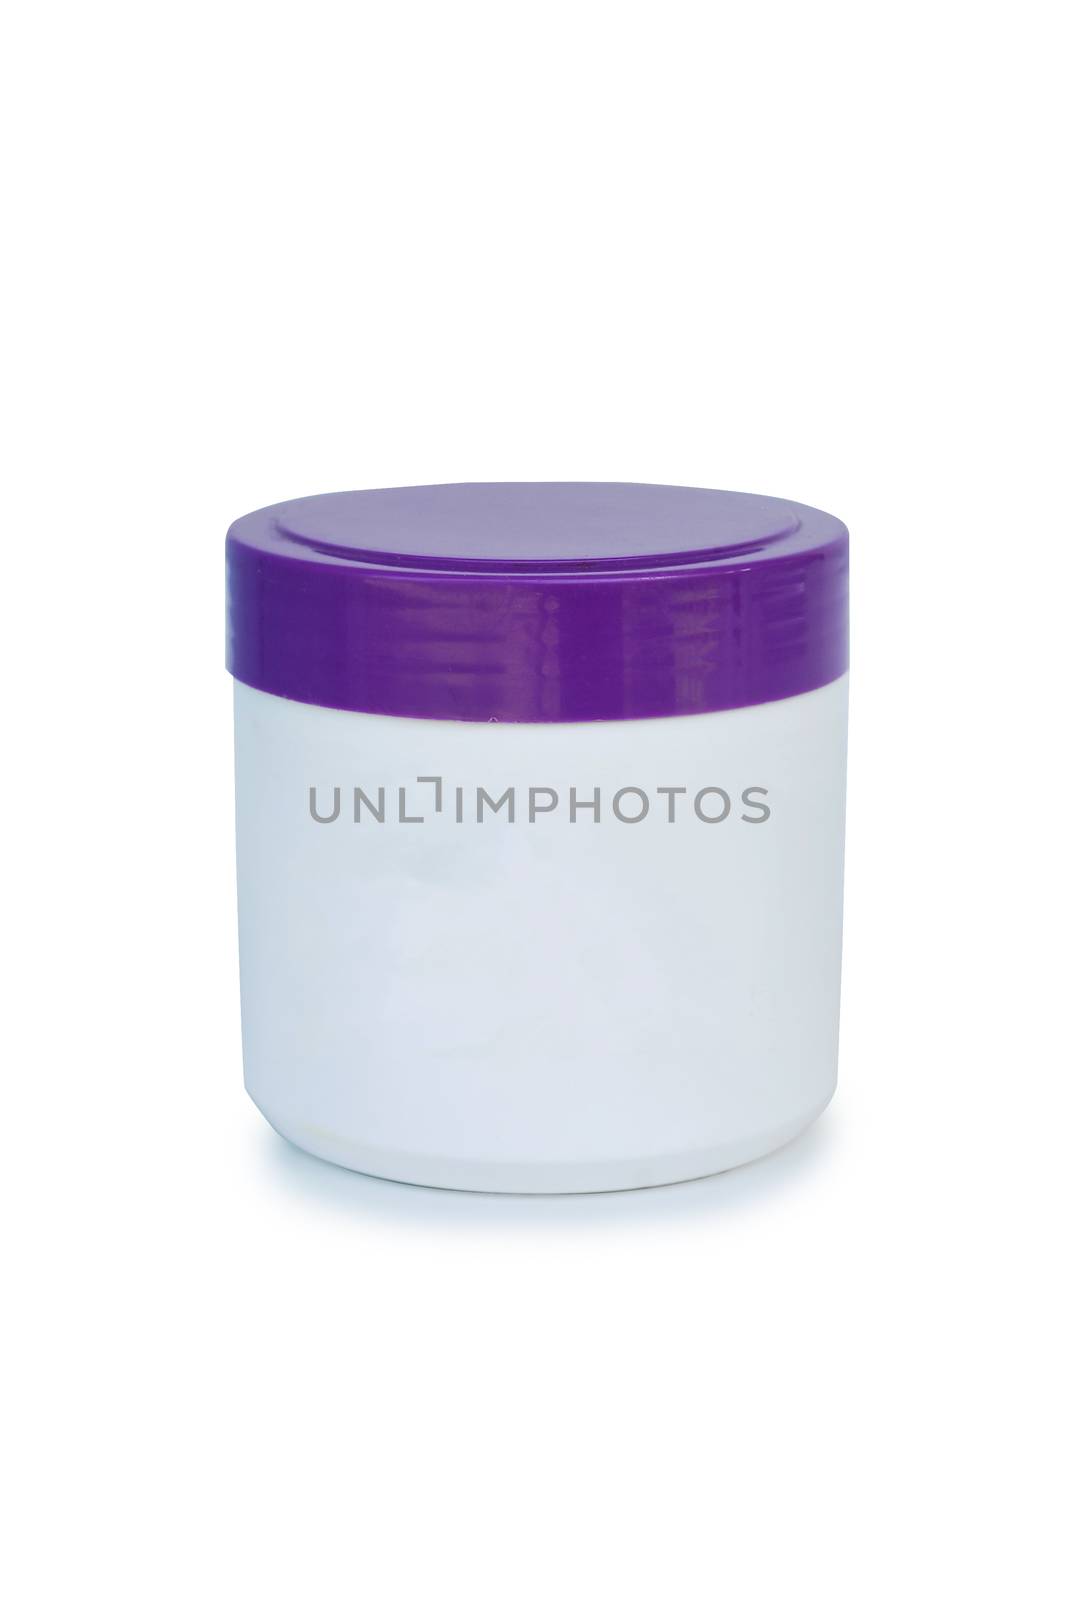 Treatment bottle on white background.With Clipping Path.